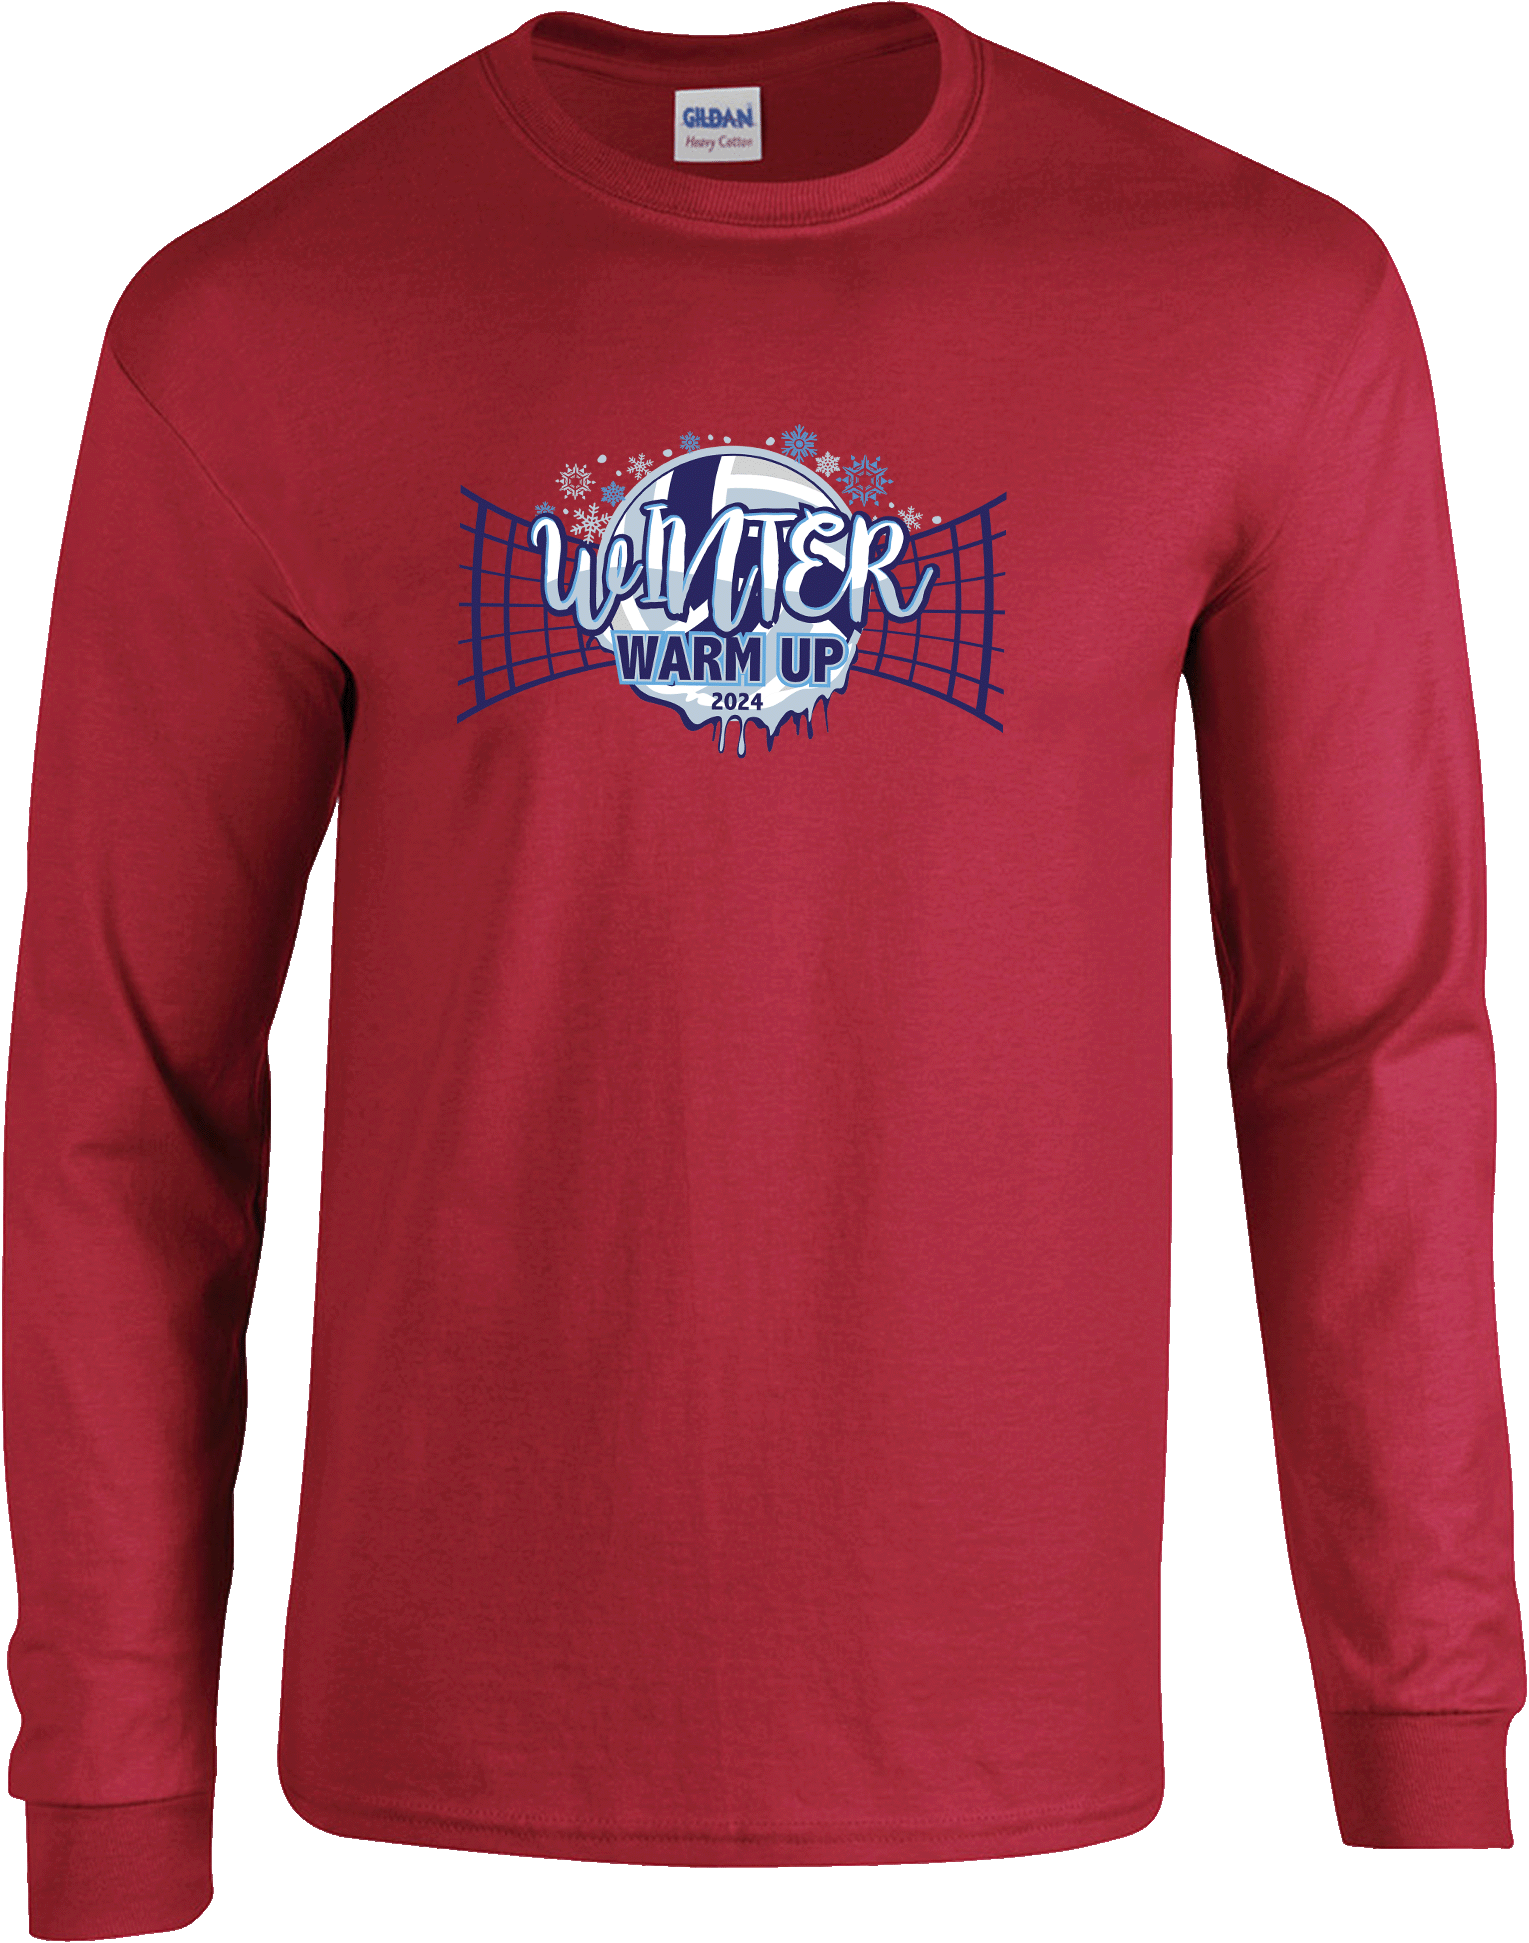 Long Sleeves - 2024 Winter Warm-Up